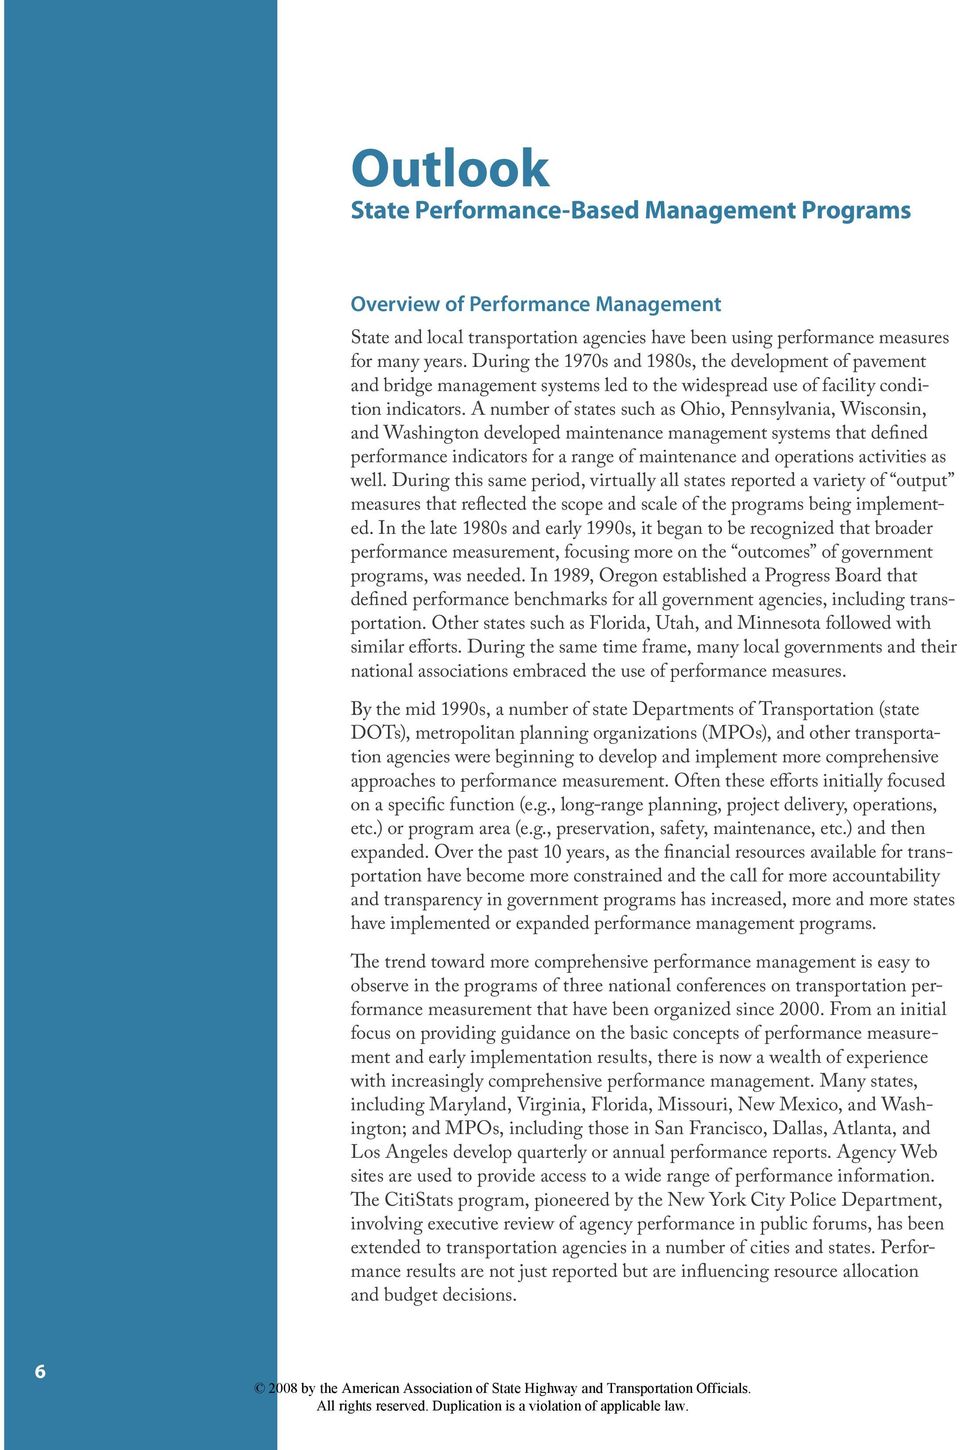 A number of states such as Ohio, Pennsylvania, Wisconsin, and Washington developed maintenance management systems that defined performance indicators for a range of maintenance and operations